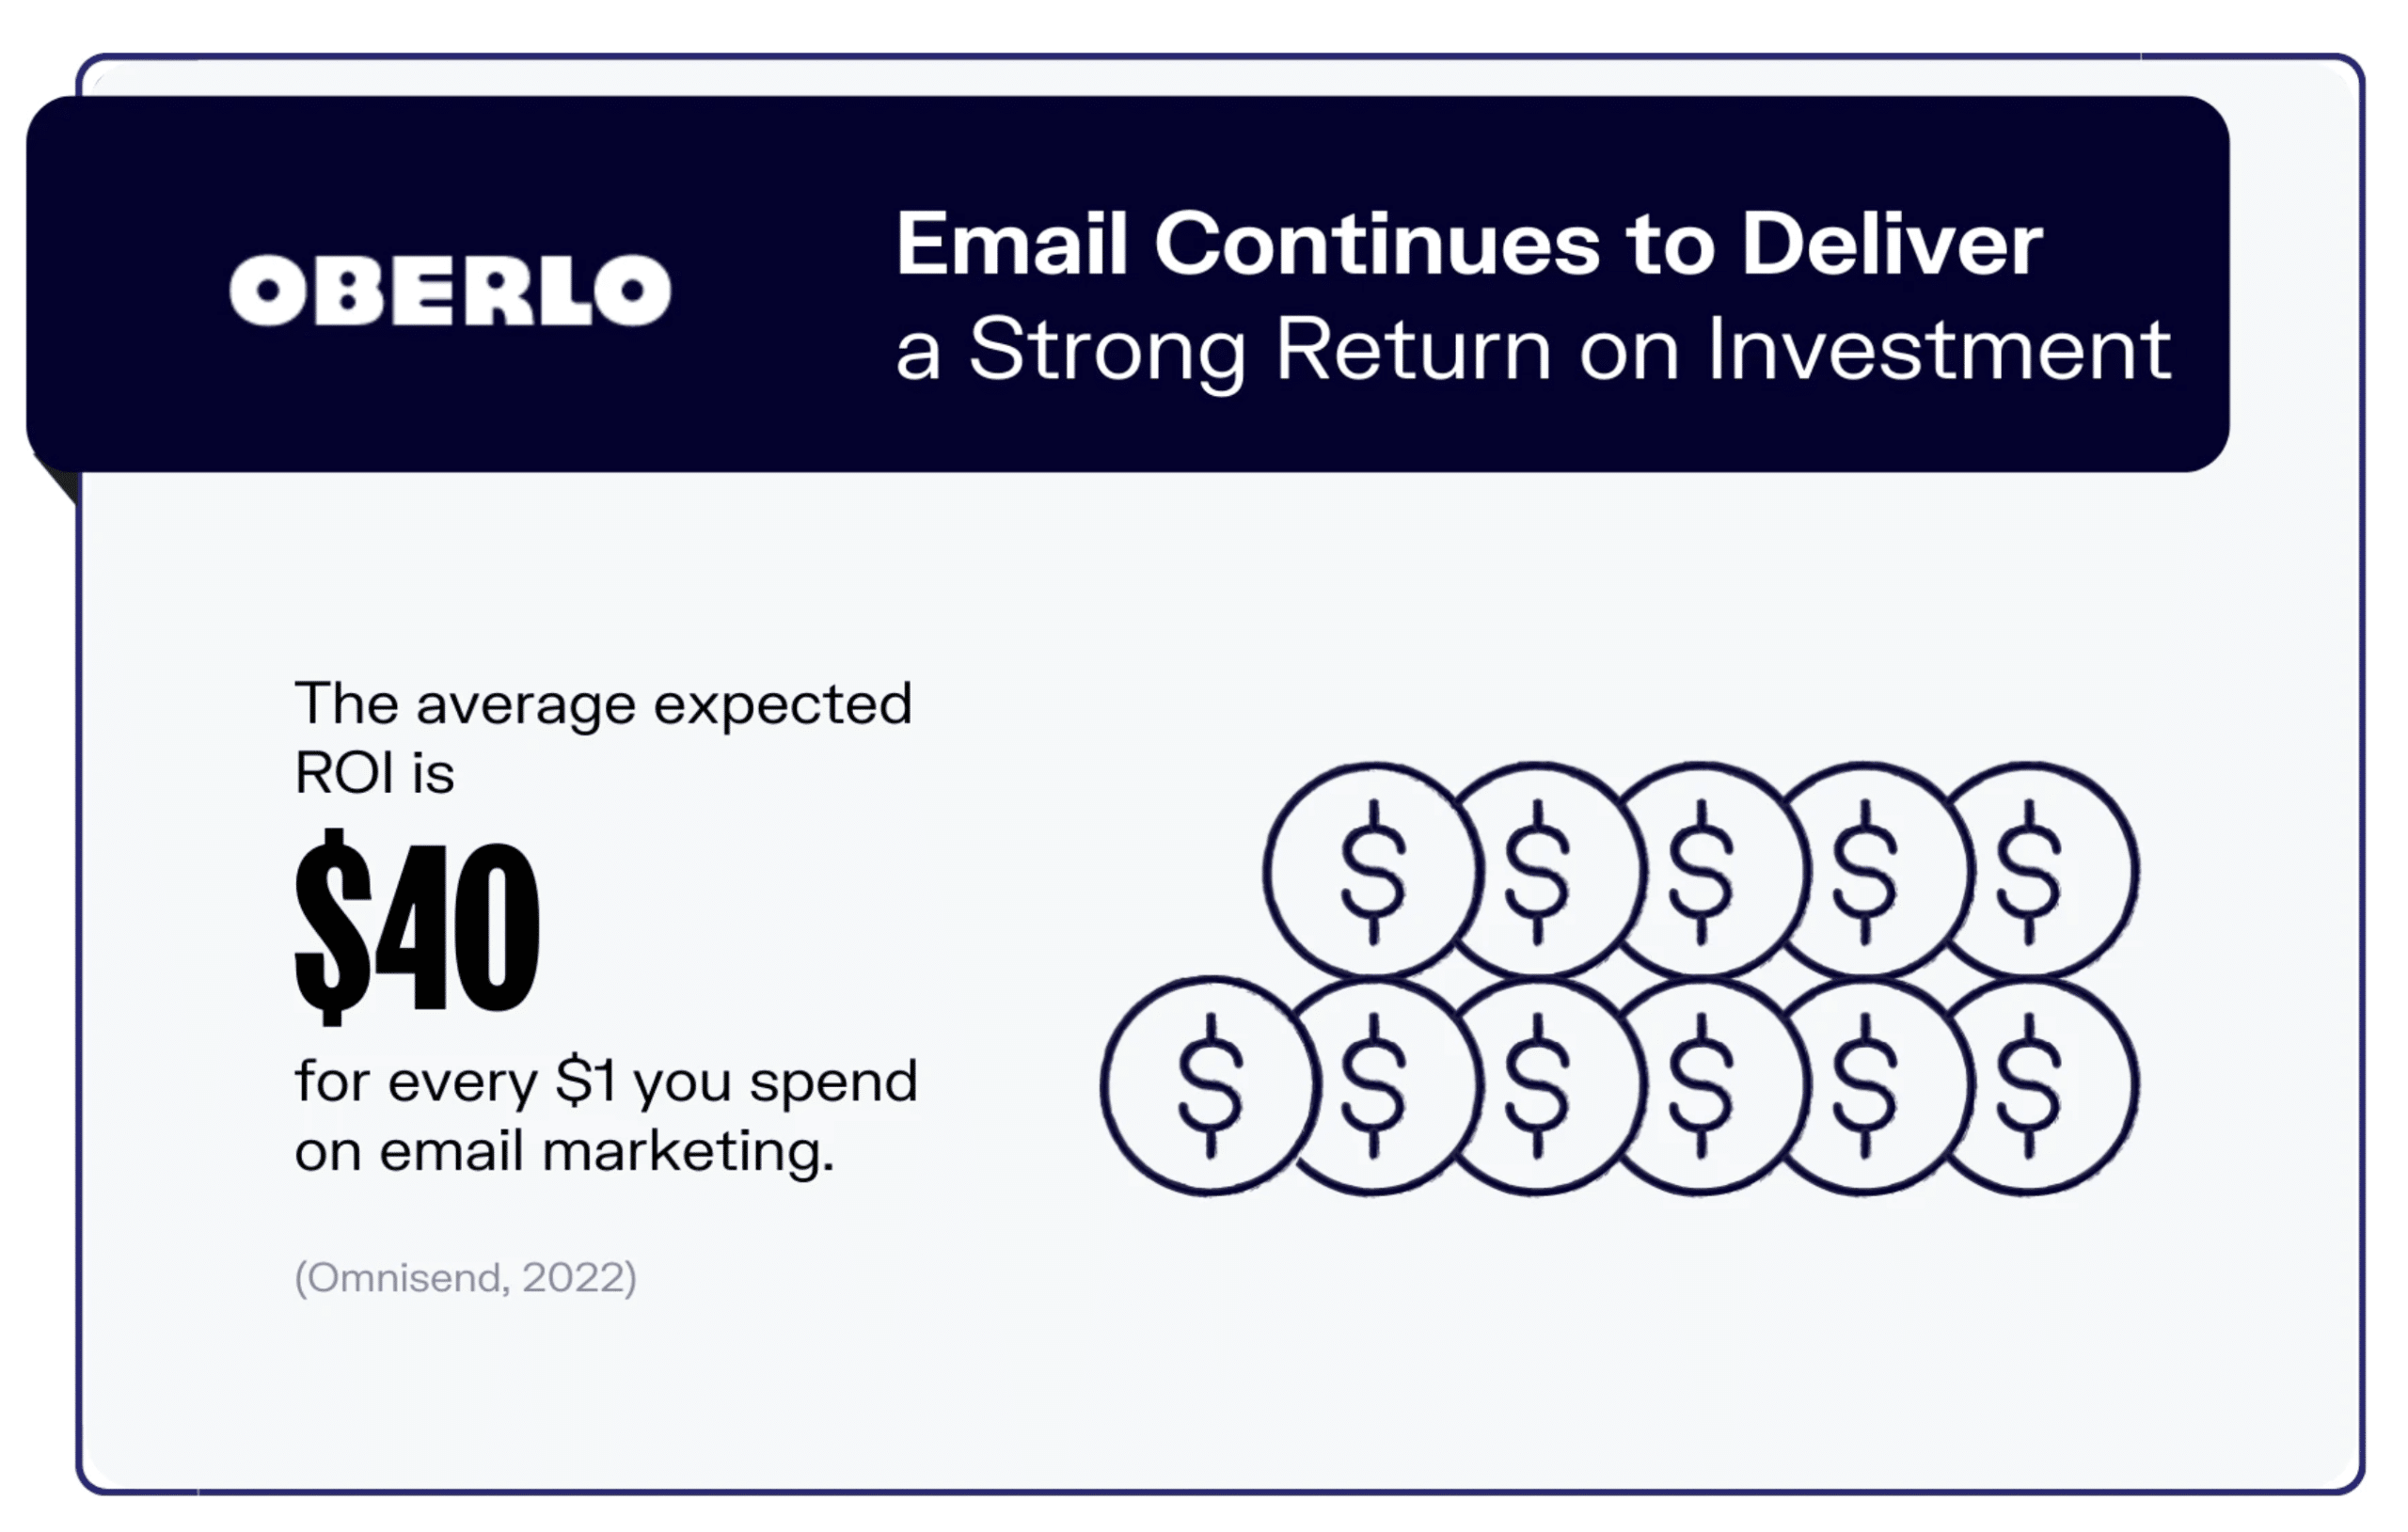 image shows that email marketing delivers a strong return on investment